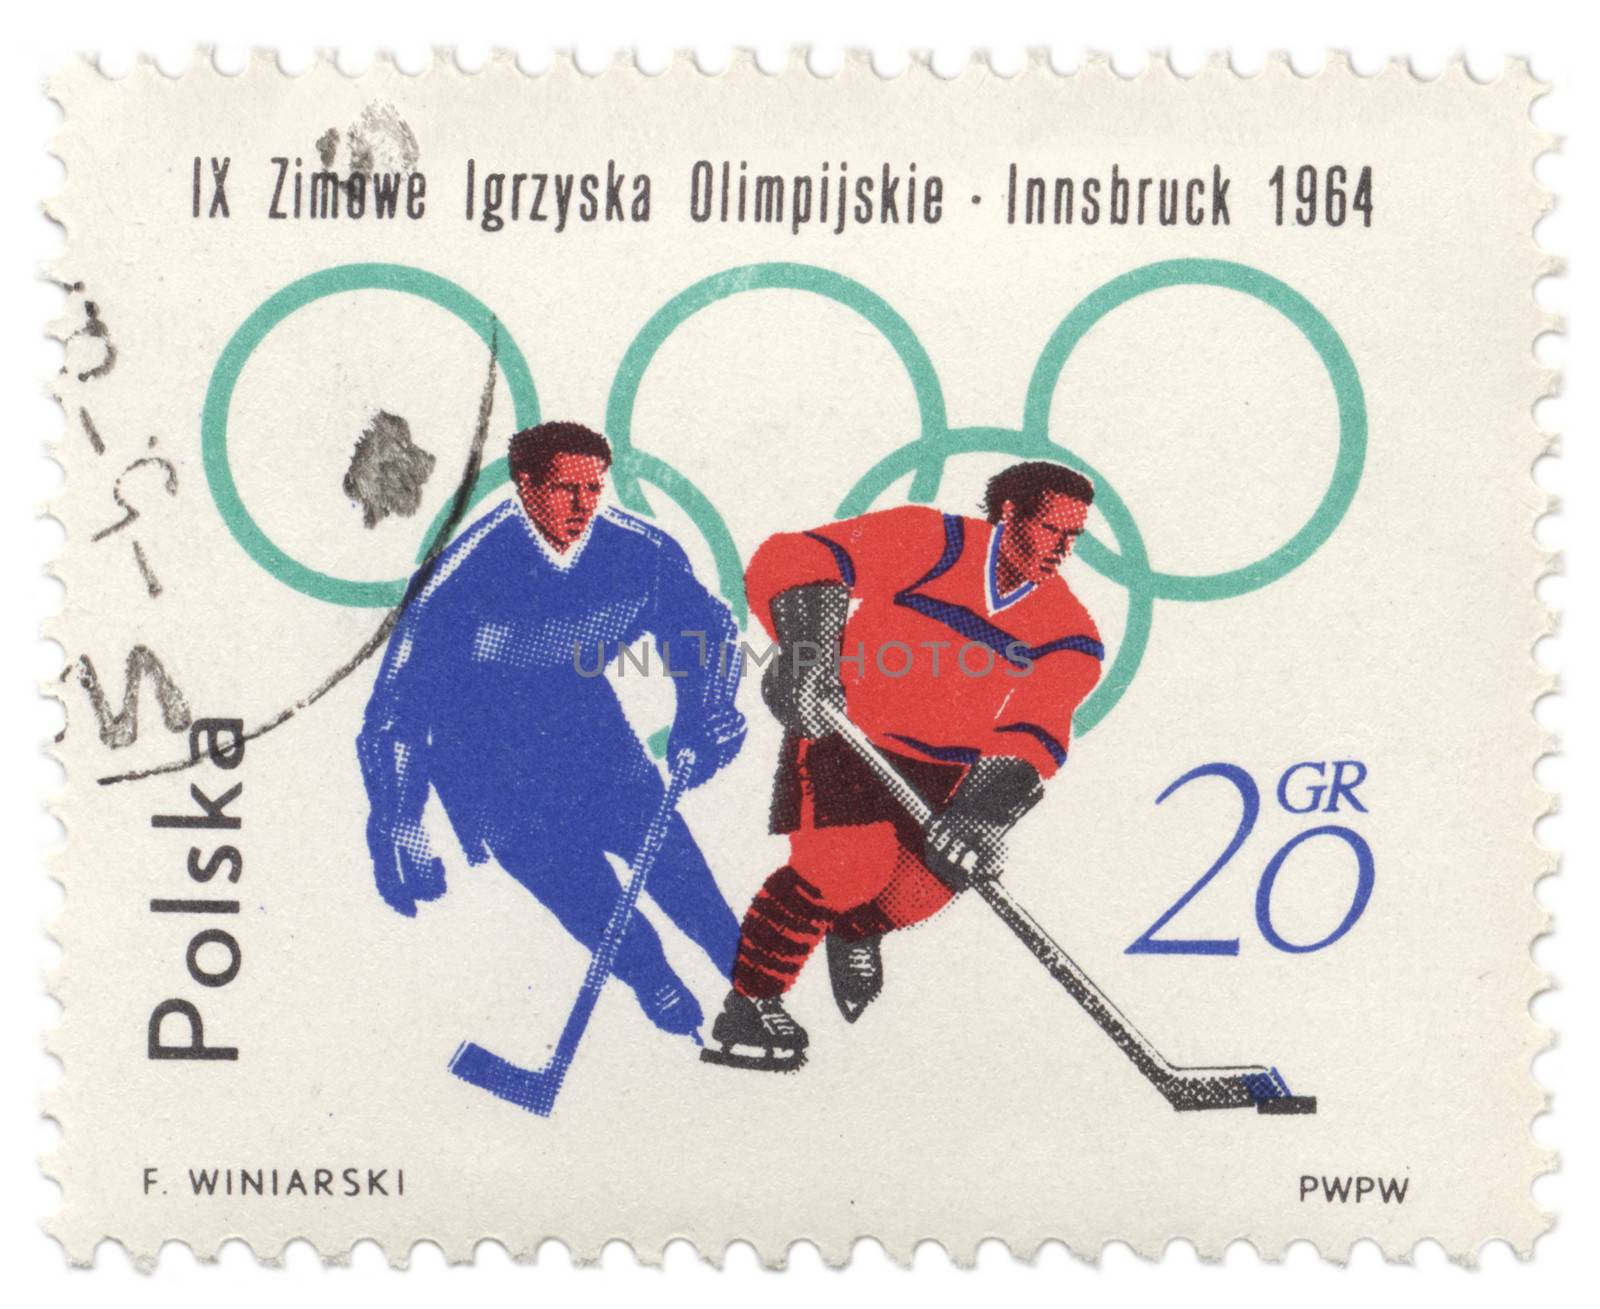 POLAND - CIRCA 1964: A post stamp printed in Poland shows ice hockey, devoted to the Winter Olympic Games in Innsbruck, series, circa 1964